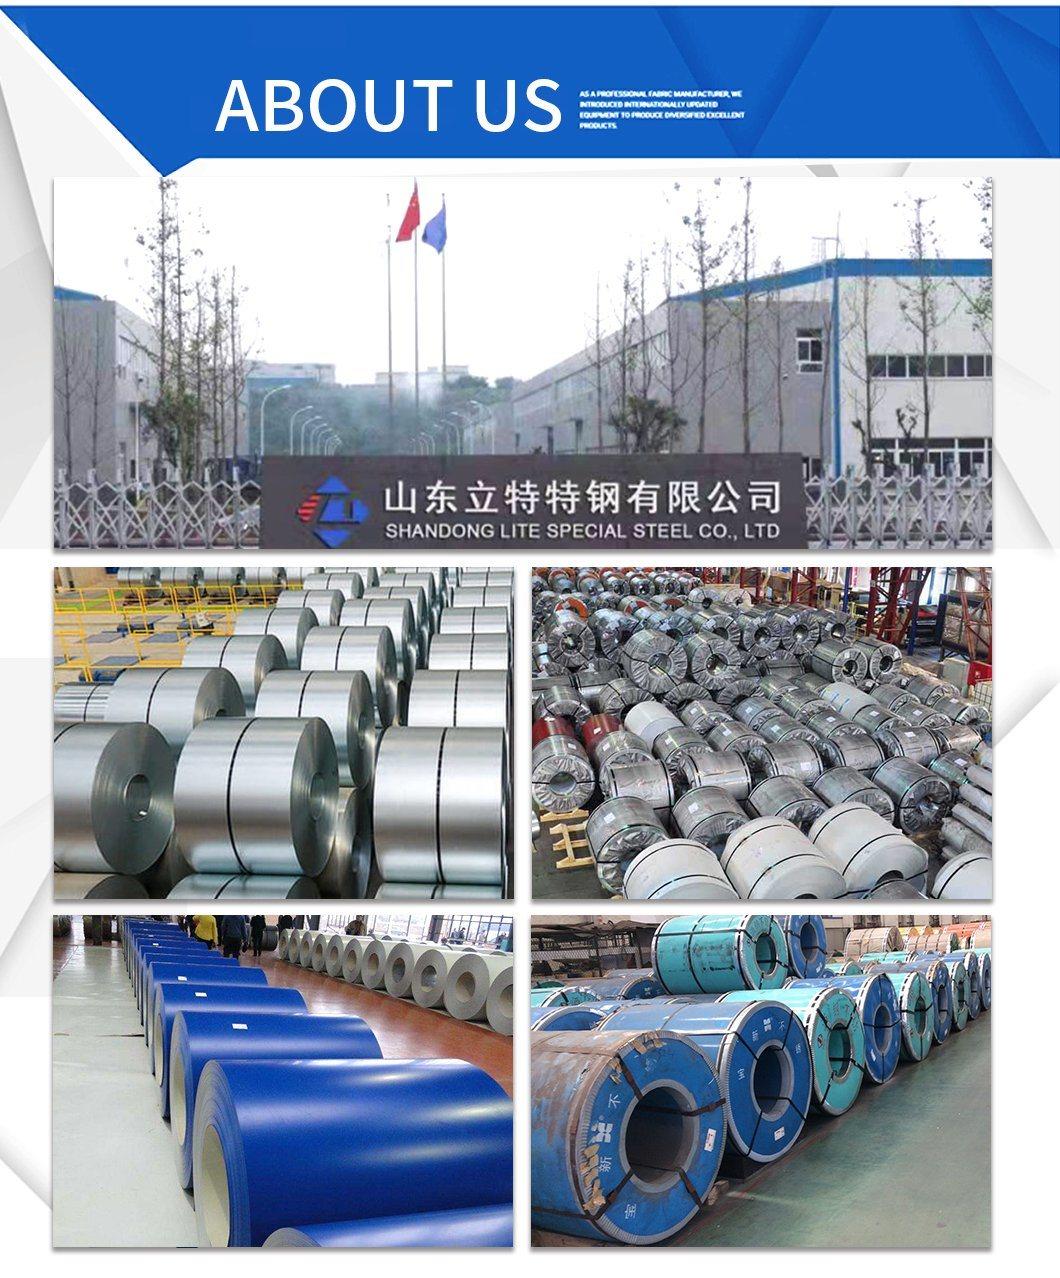 Hot Rolled Steel Coil Galvalume SGLCC Cglcc Sglcd Cglcd Sglcdd Cglcdd Hot Dipped Galvanized Steel Coil Price